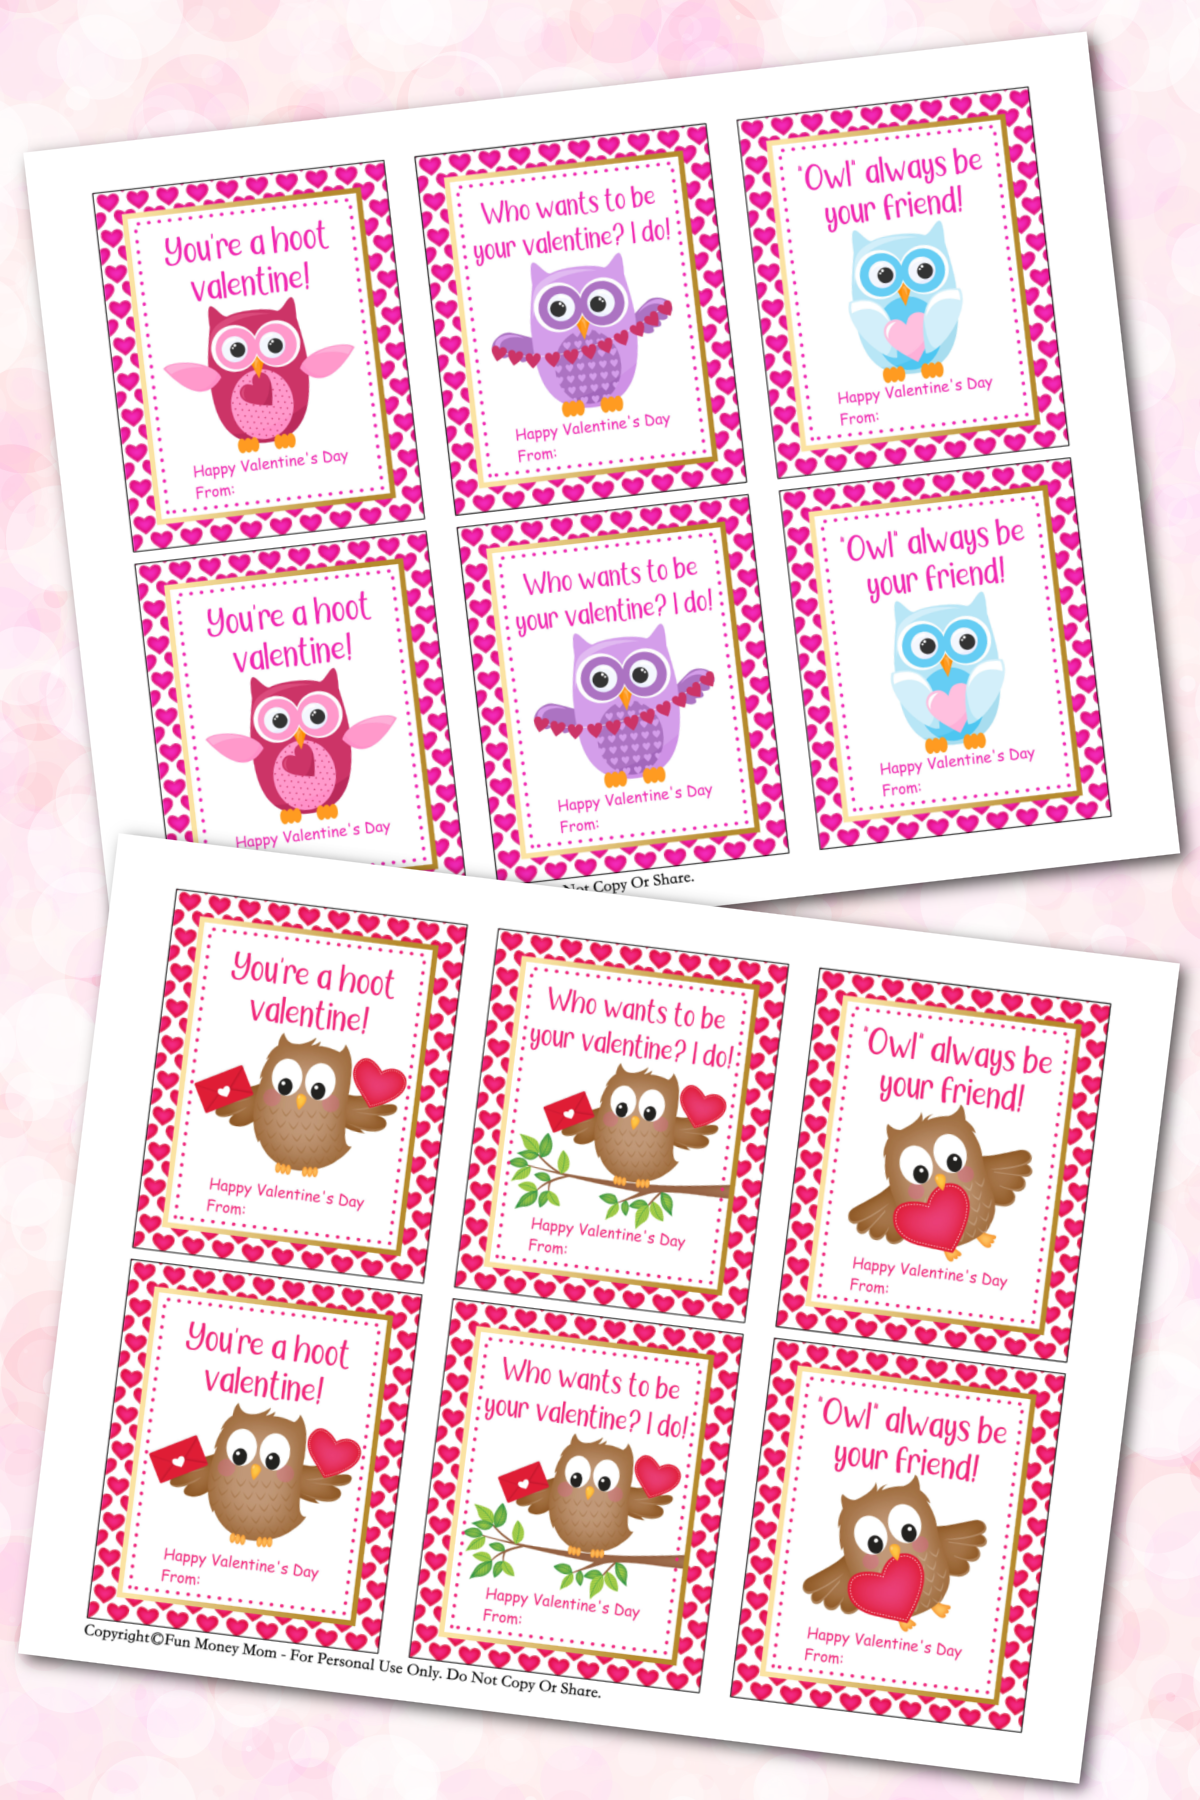 Printable valentine Valentine's Day cards with owls on pink background